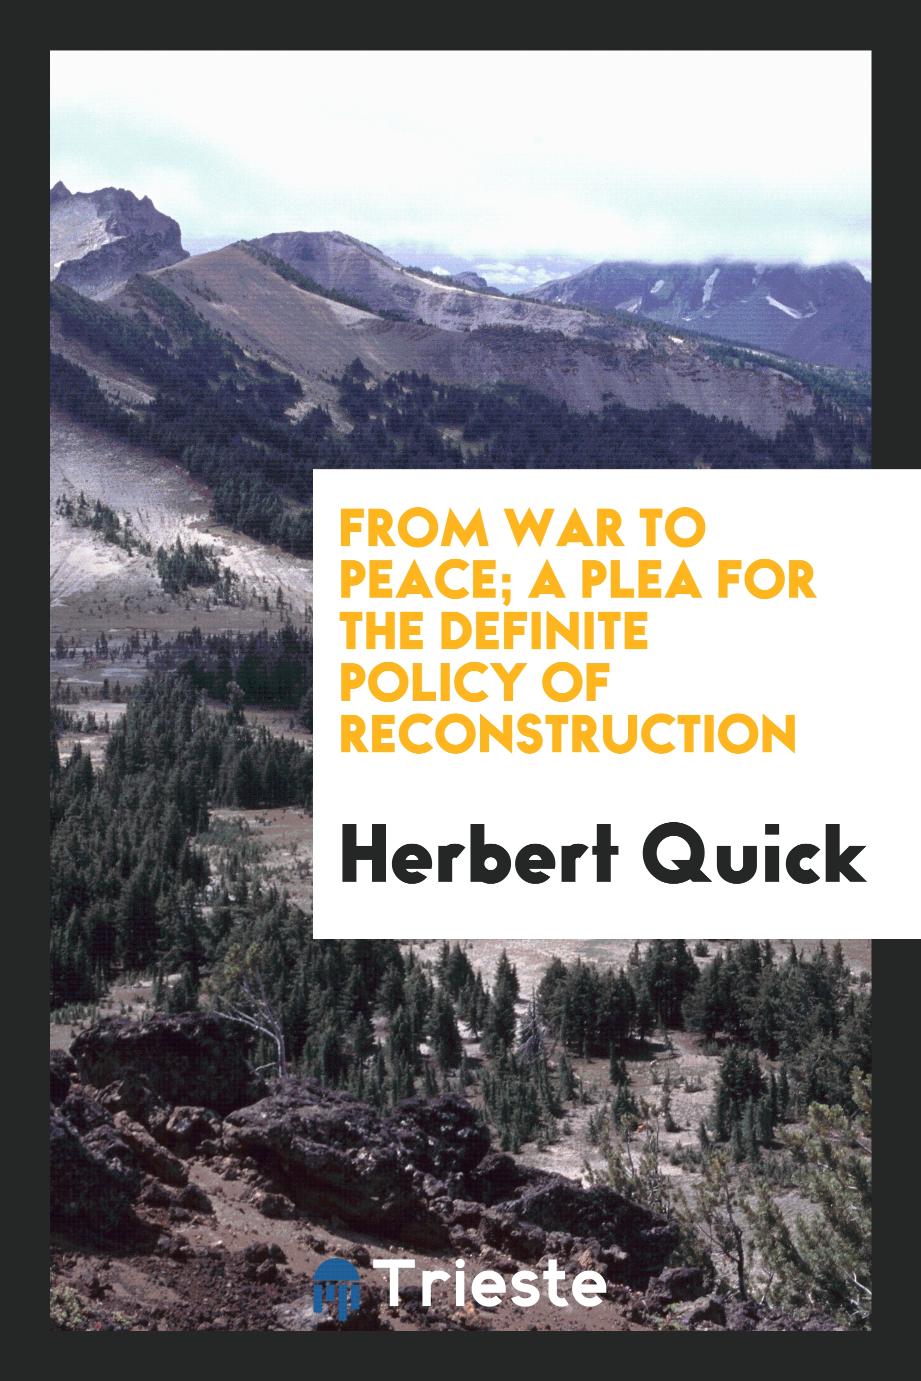 From war to peace; a plea for the definite policy of reconstruction